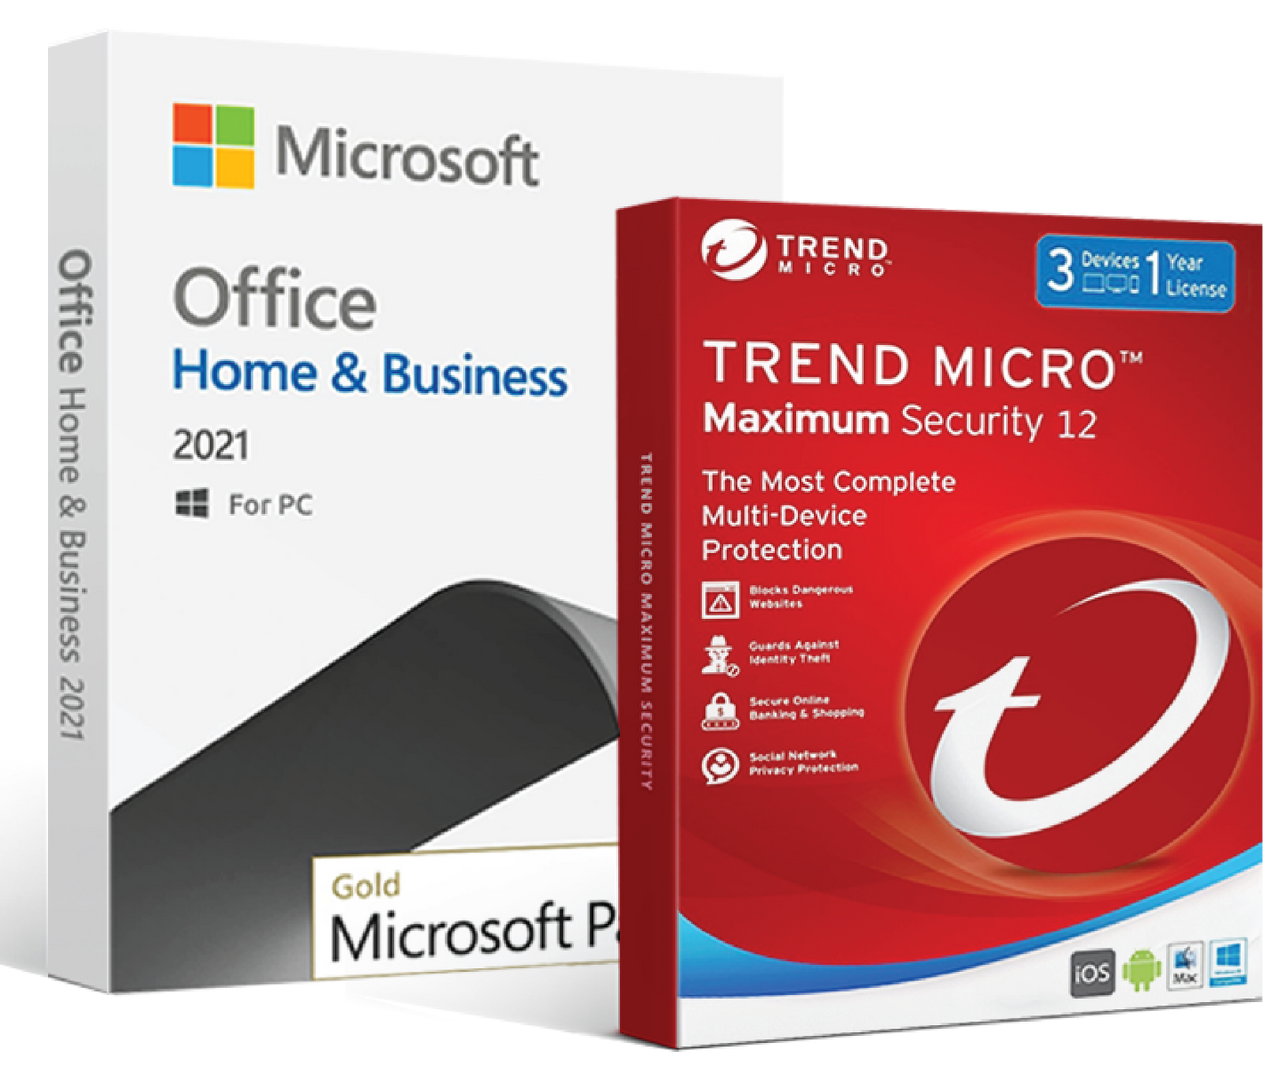 Microsoft Office 2021 Home & Business + Trend Micro Maximum Security combo